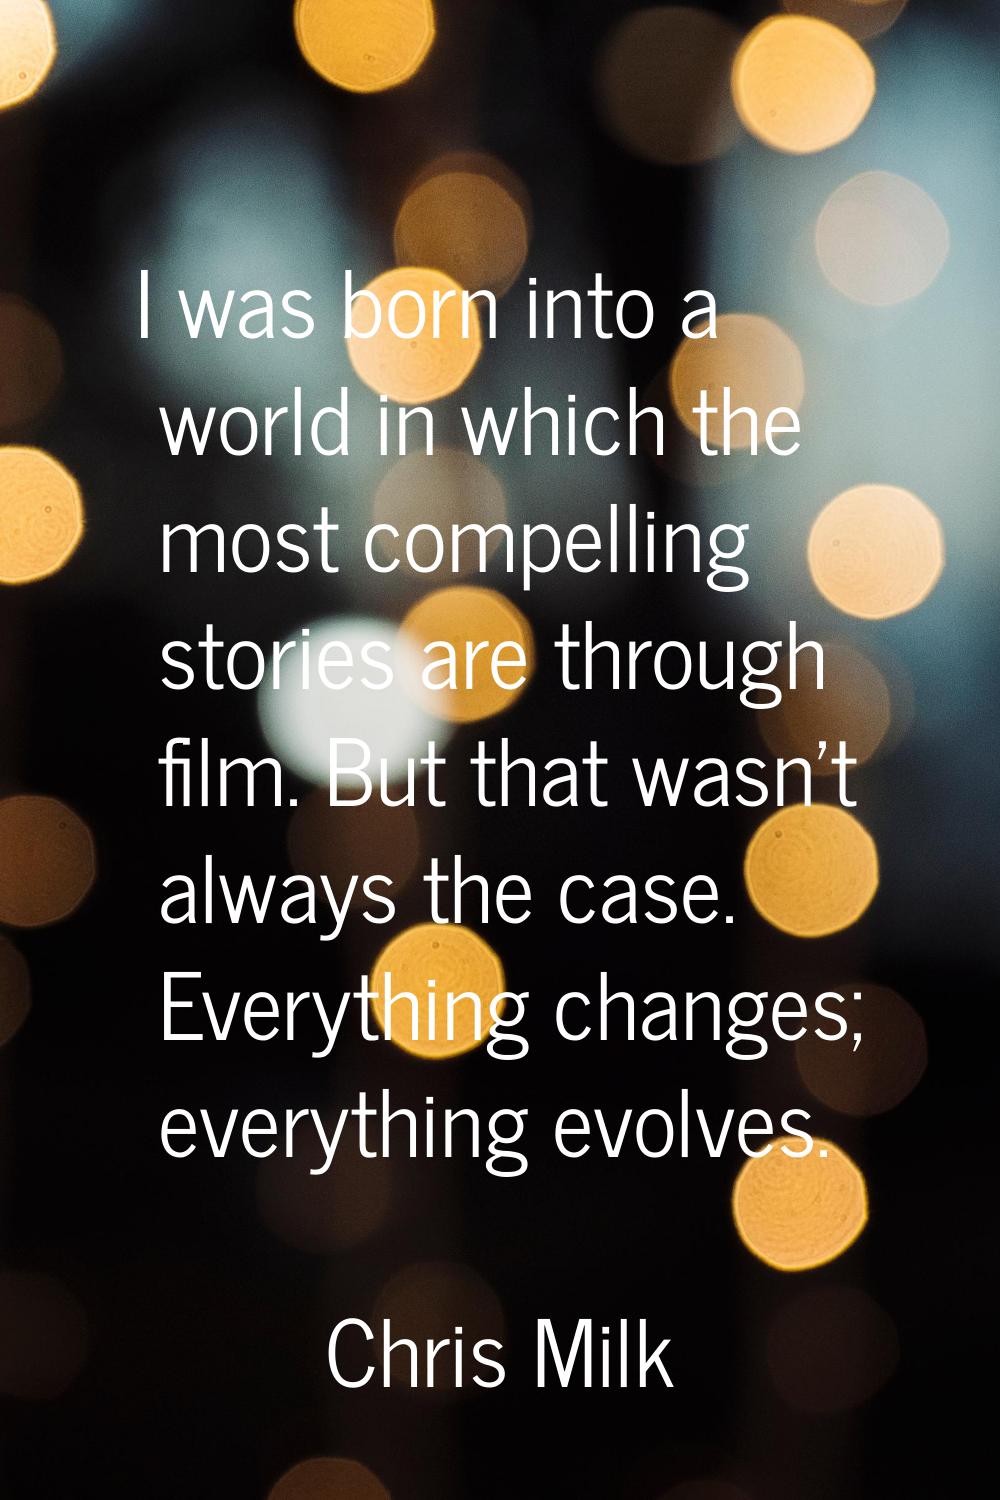 I was born into a world in which the most compelling stories are through film. But that wasn't alwa